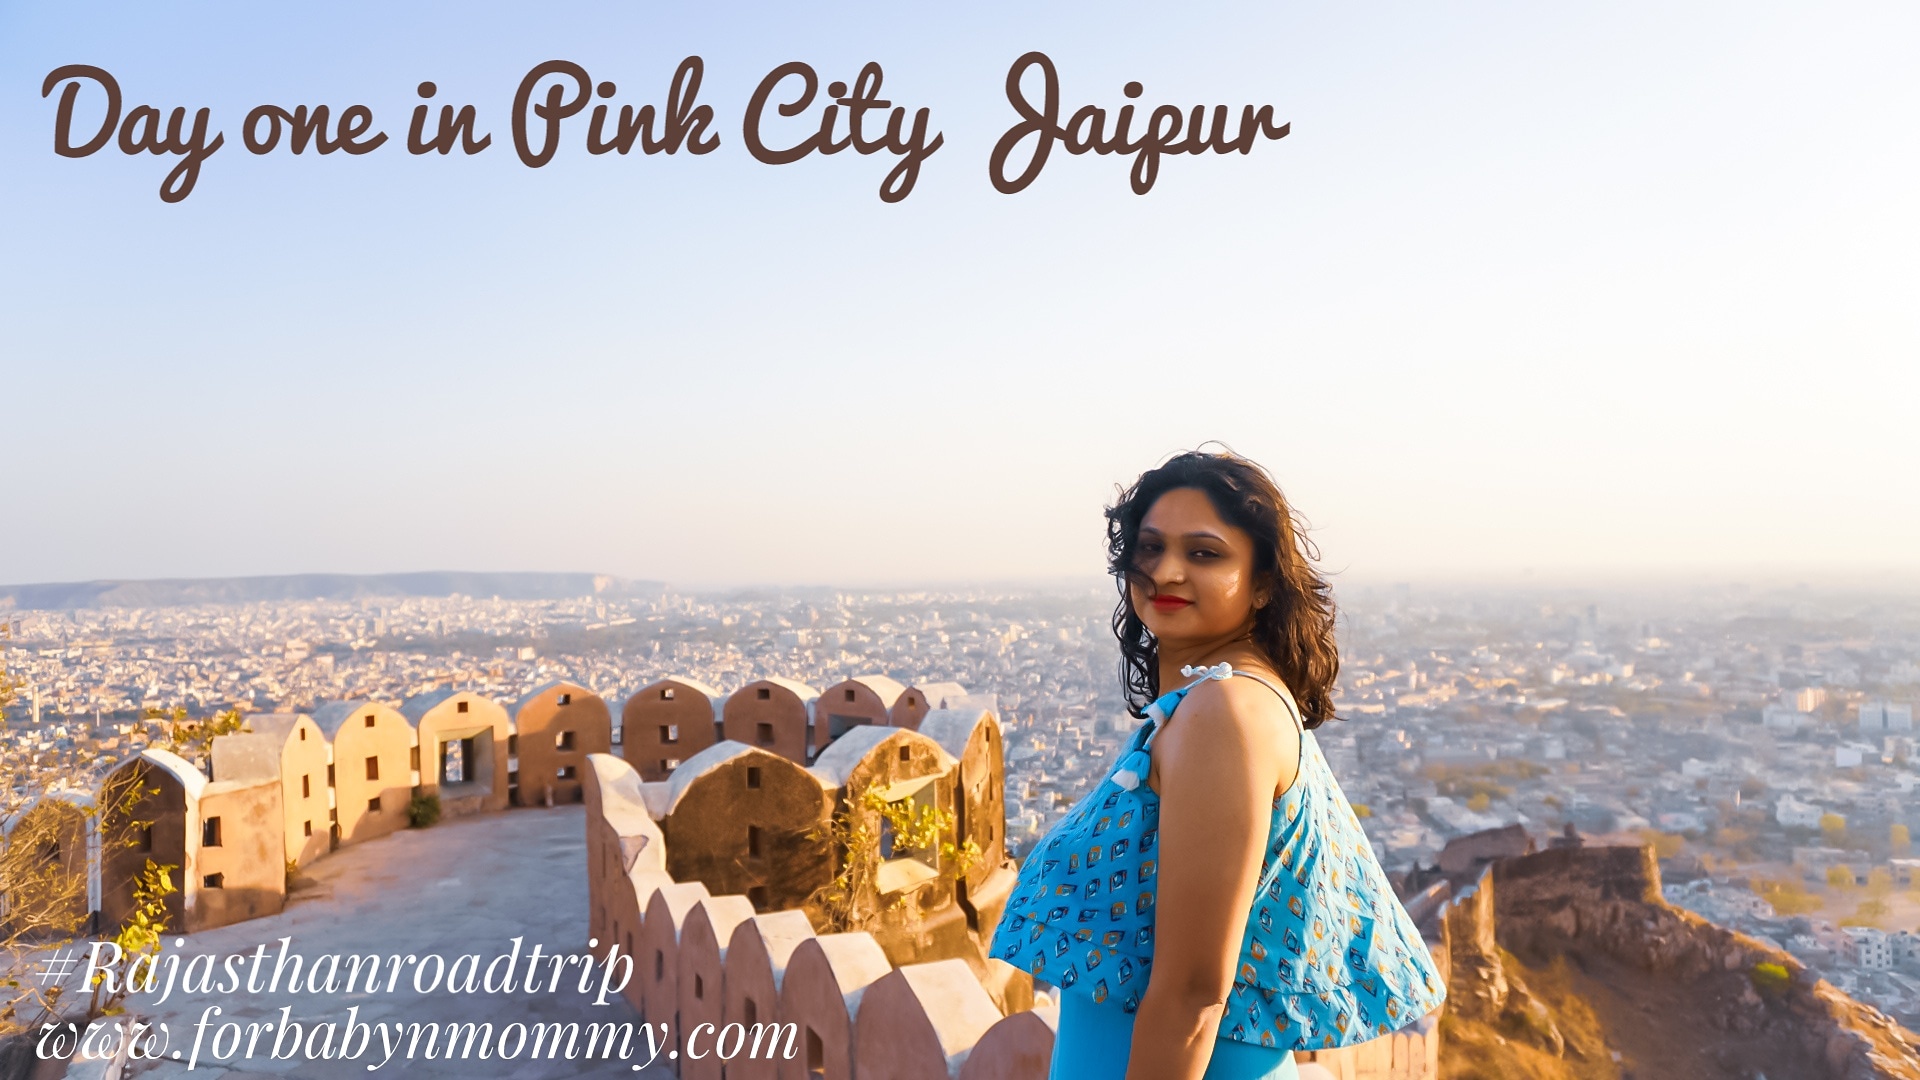 Exploring the wonderful Pink City of Rajasthan – Day 1